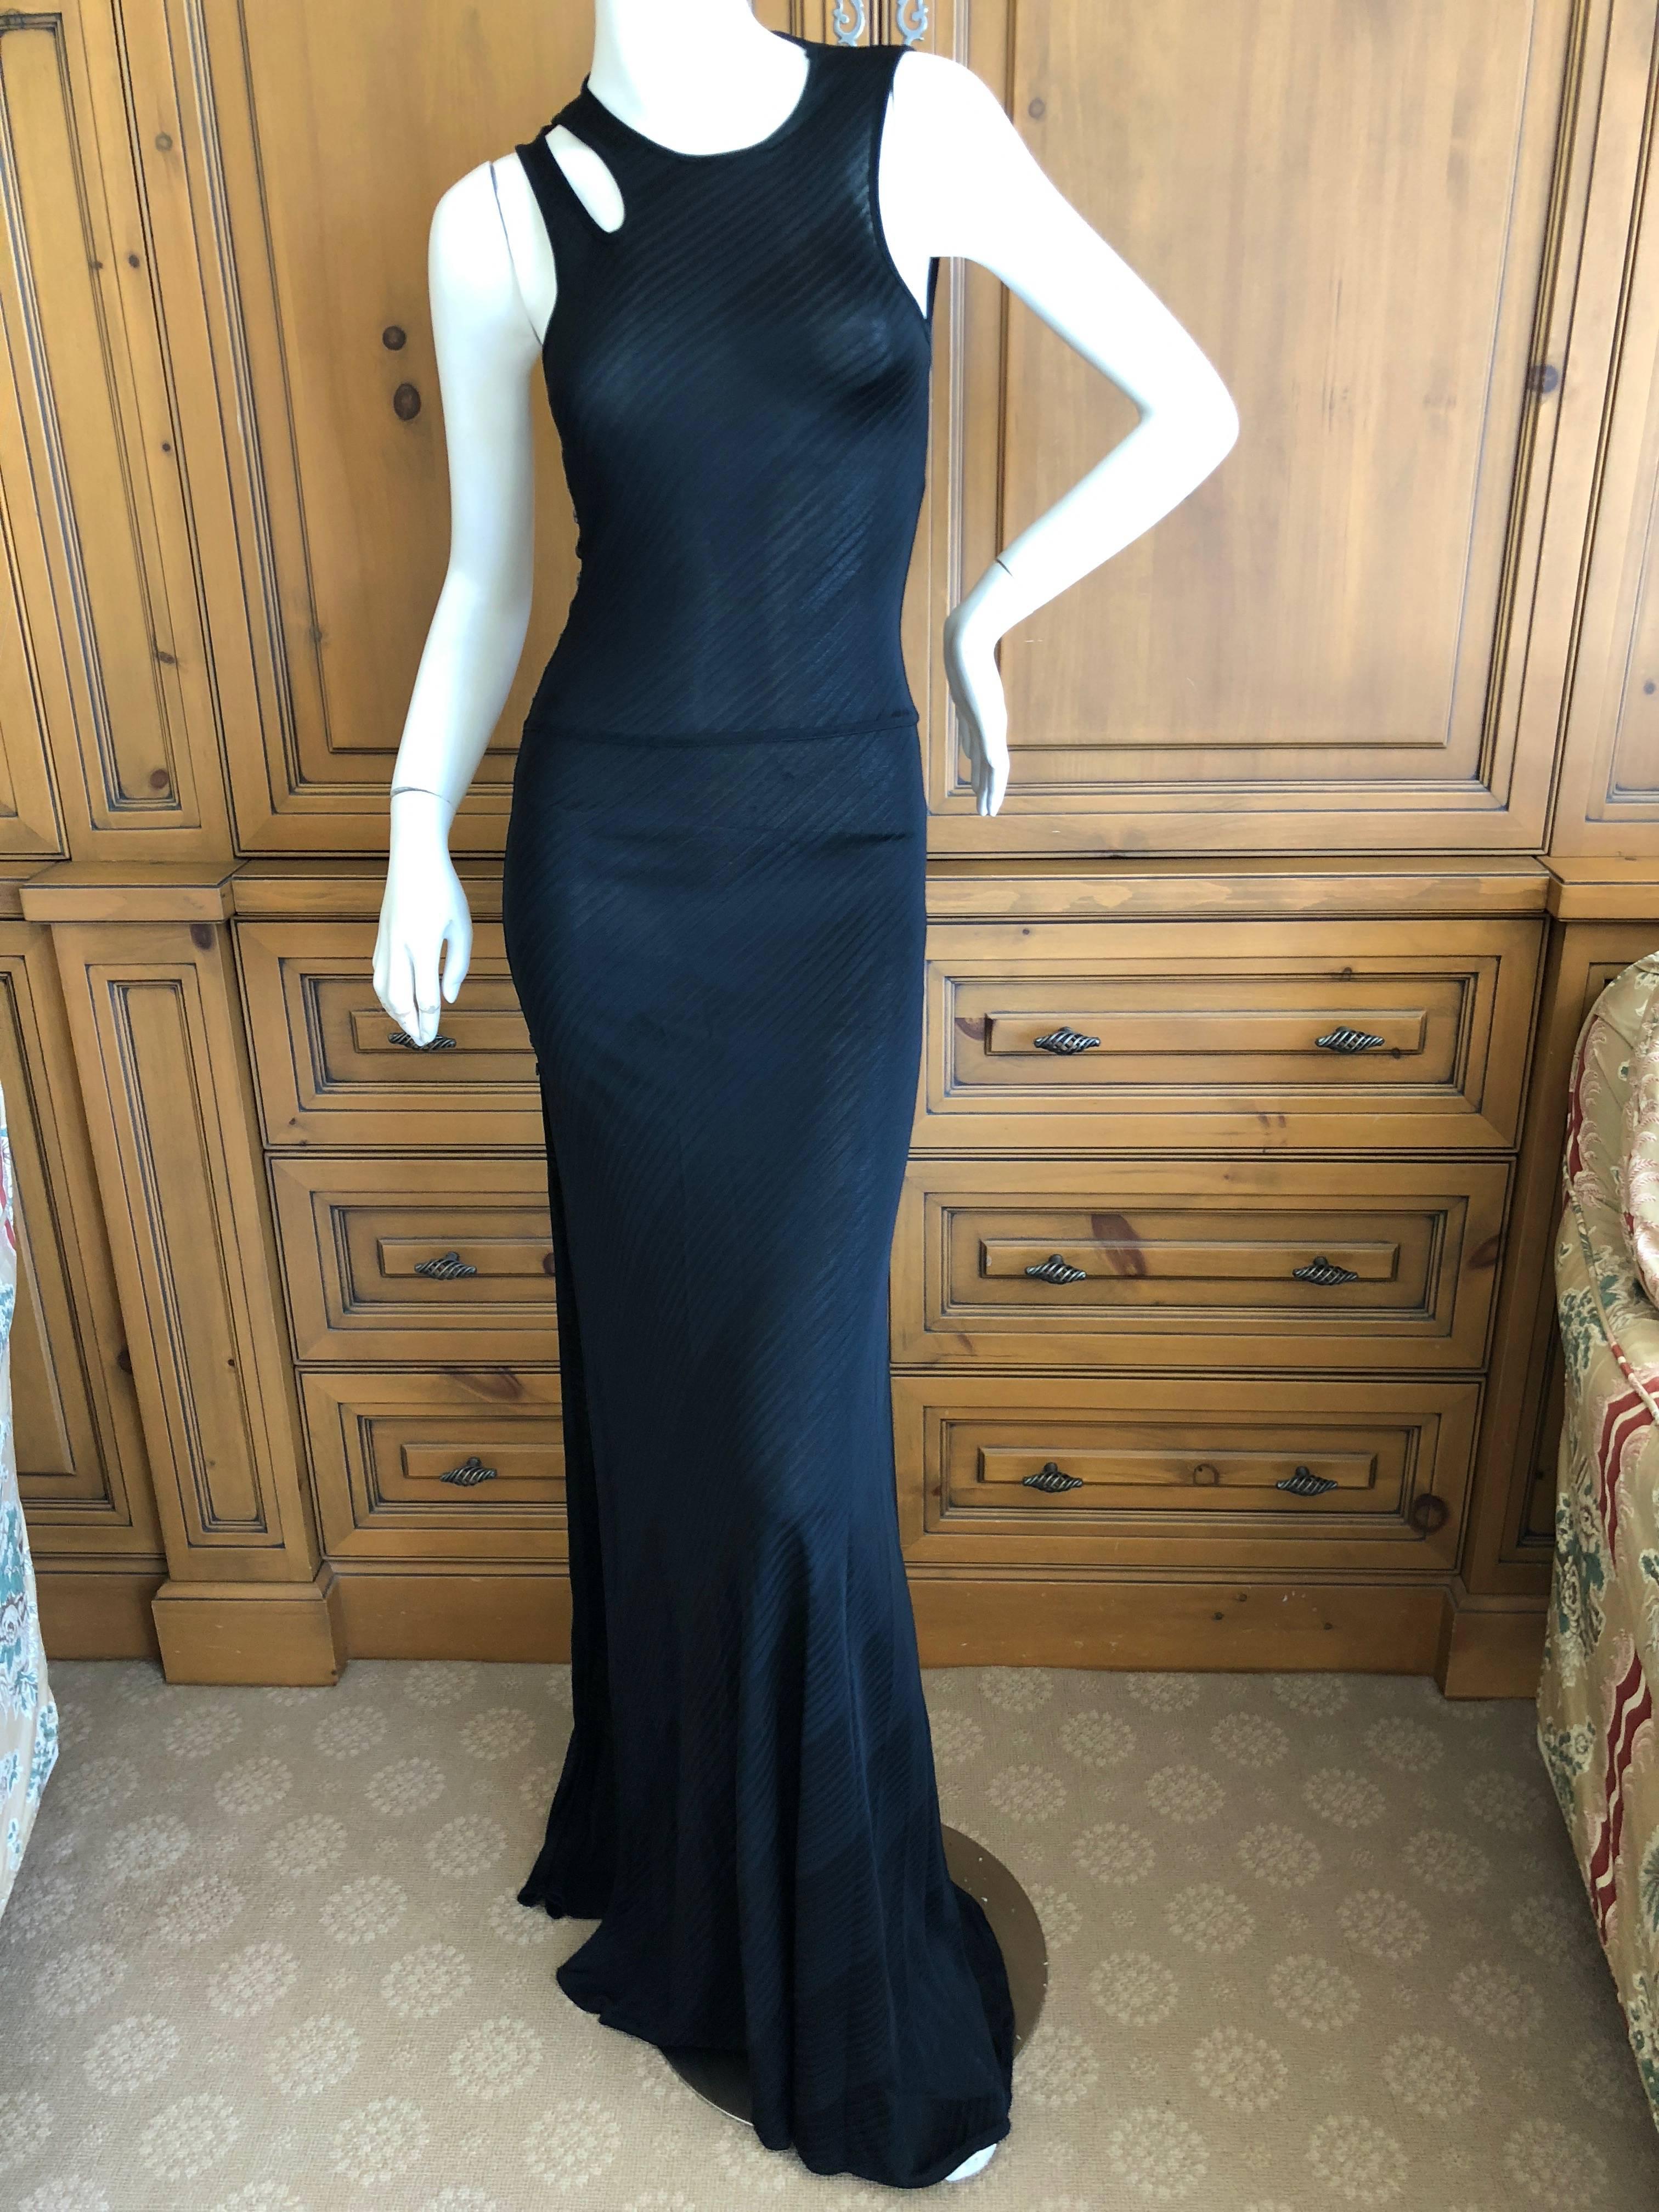  Vintage Versus, Gianni Versace Sexy Sheer Side Slit Evening Dress w Cut Outs 1